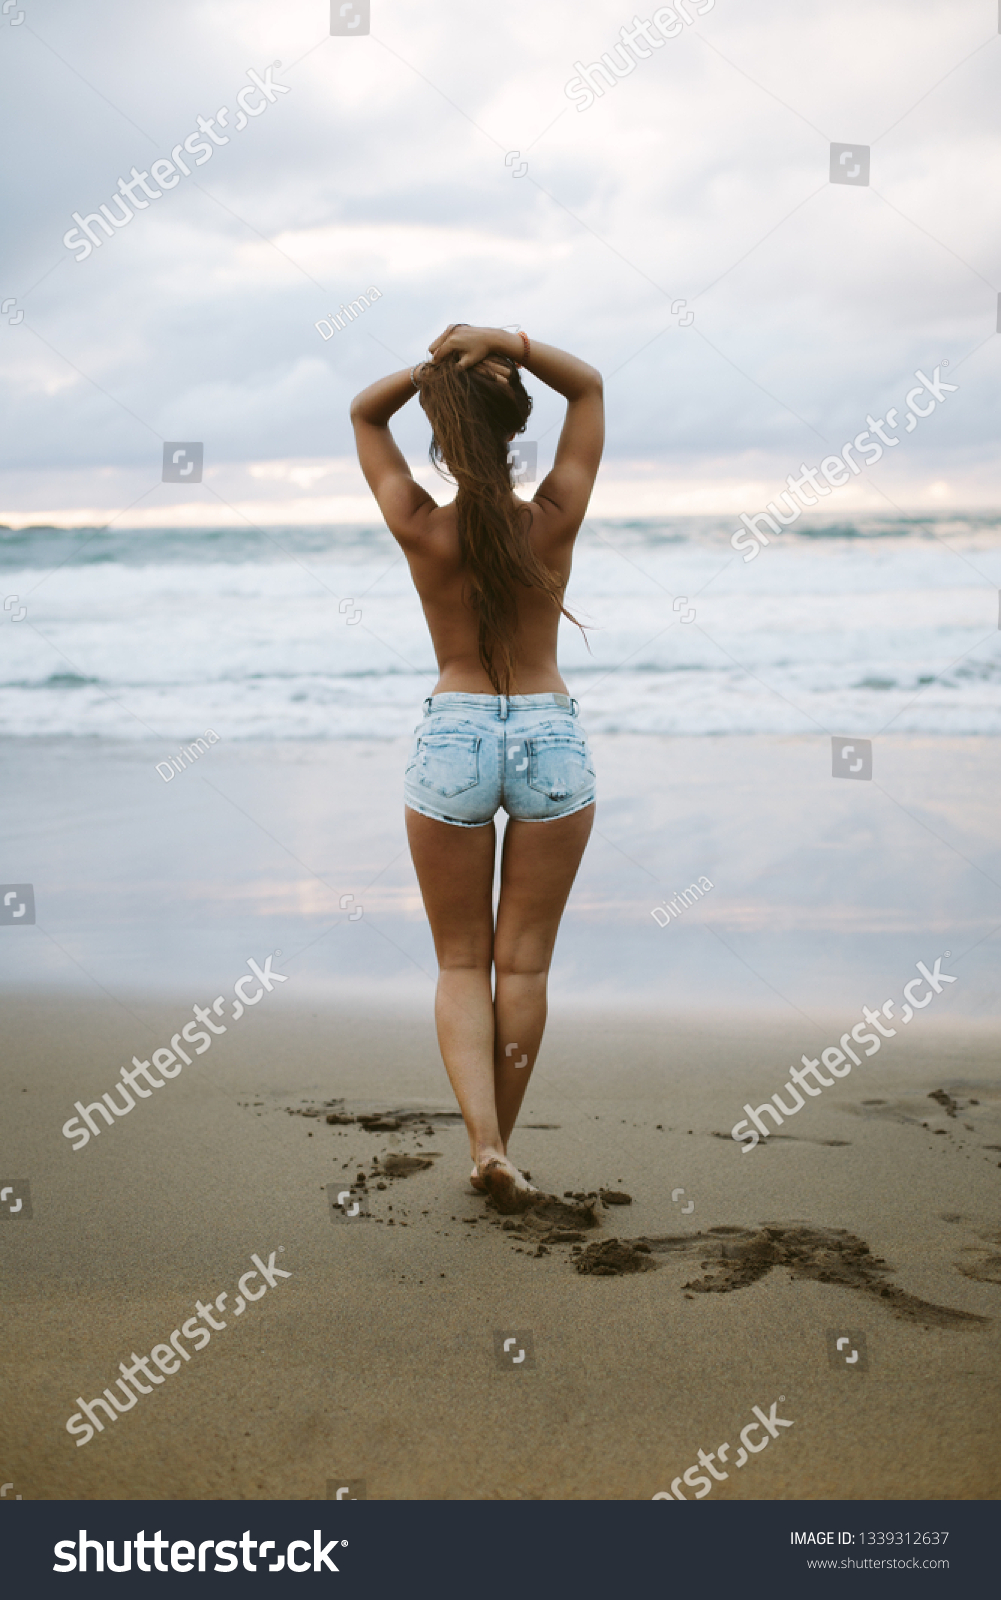 Topless Women At The Beach